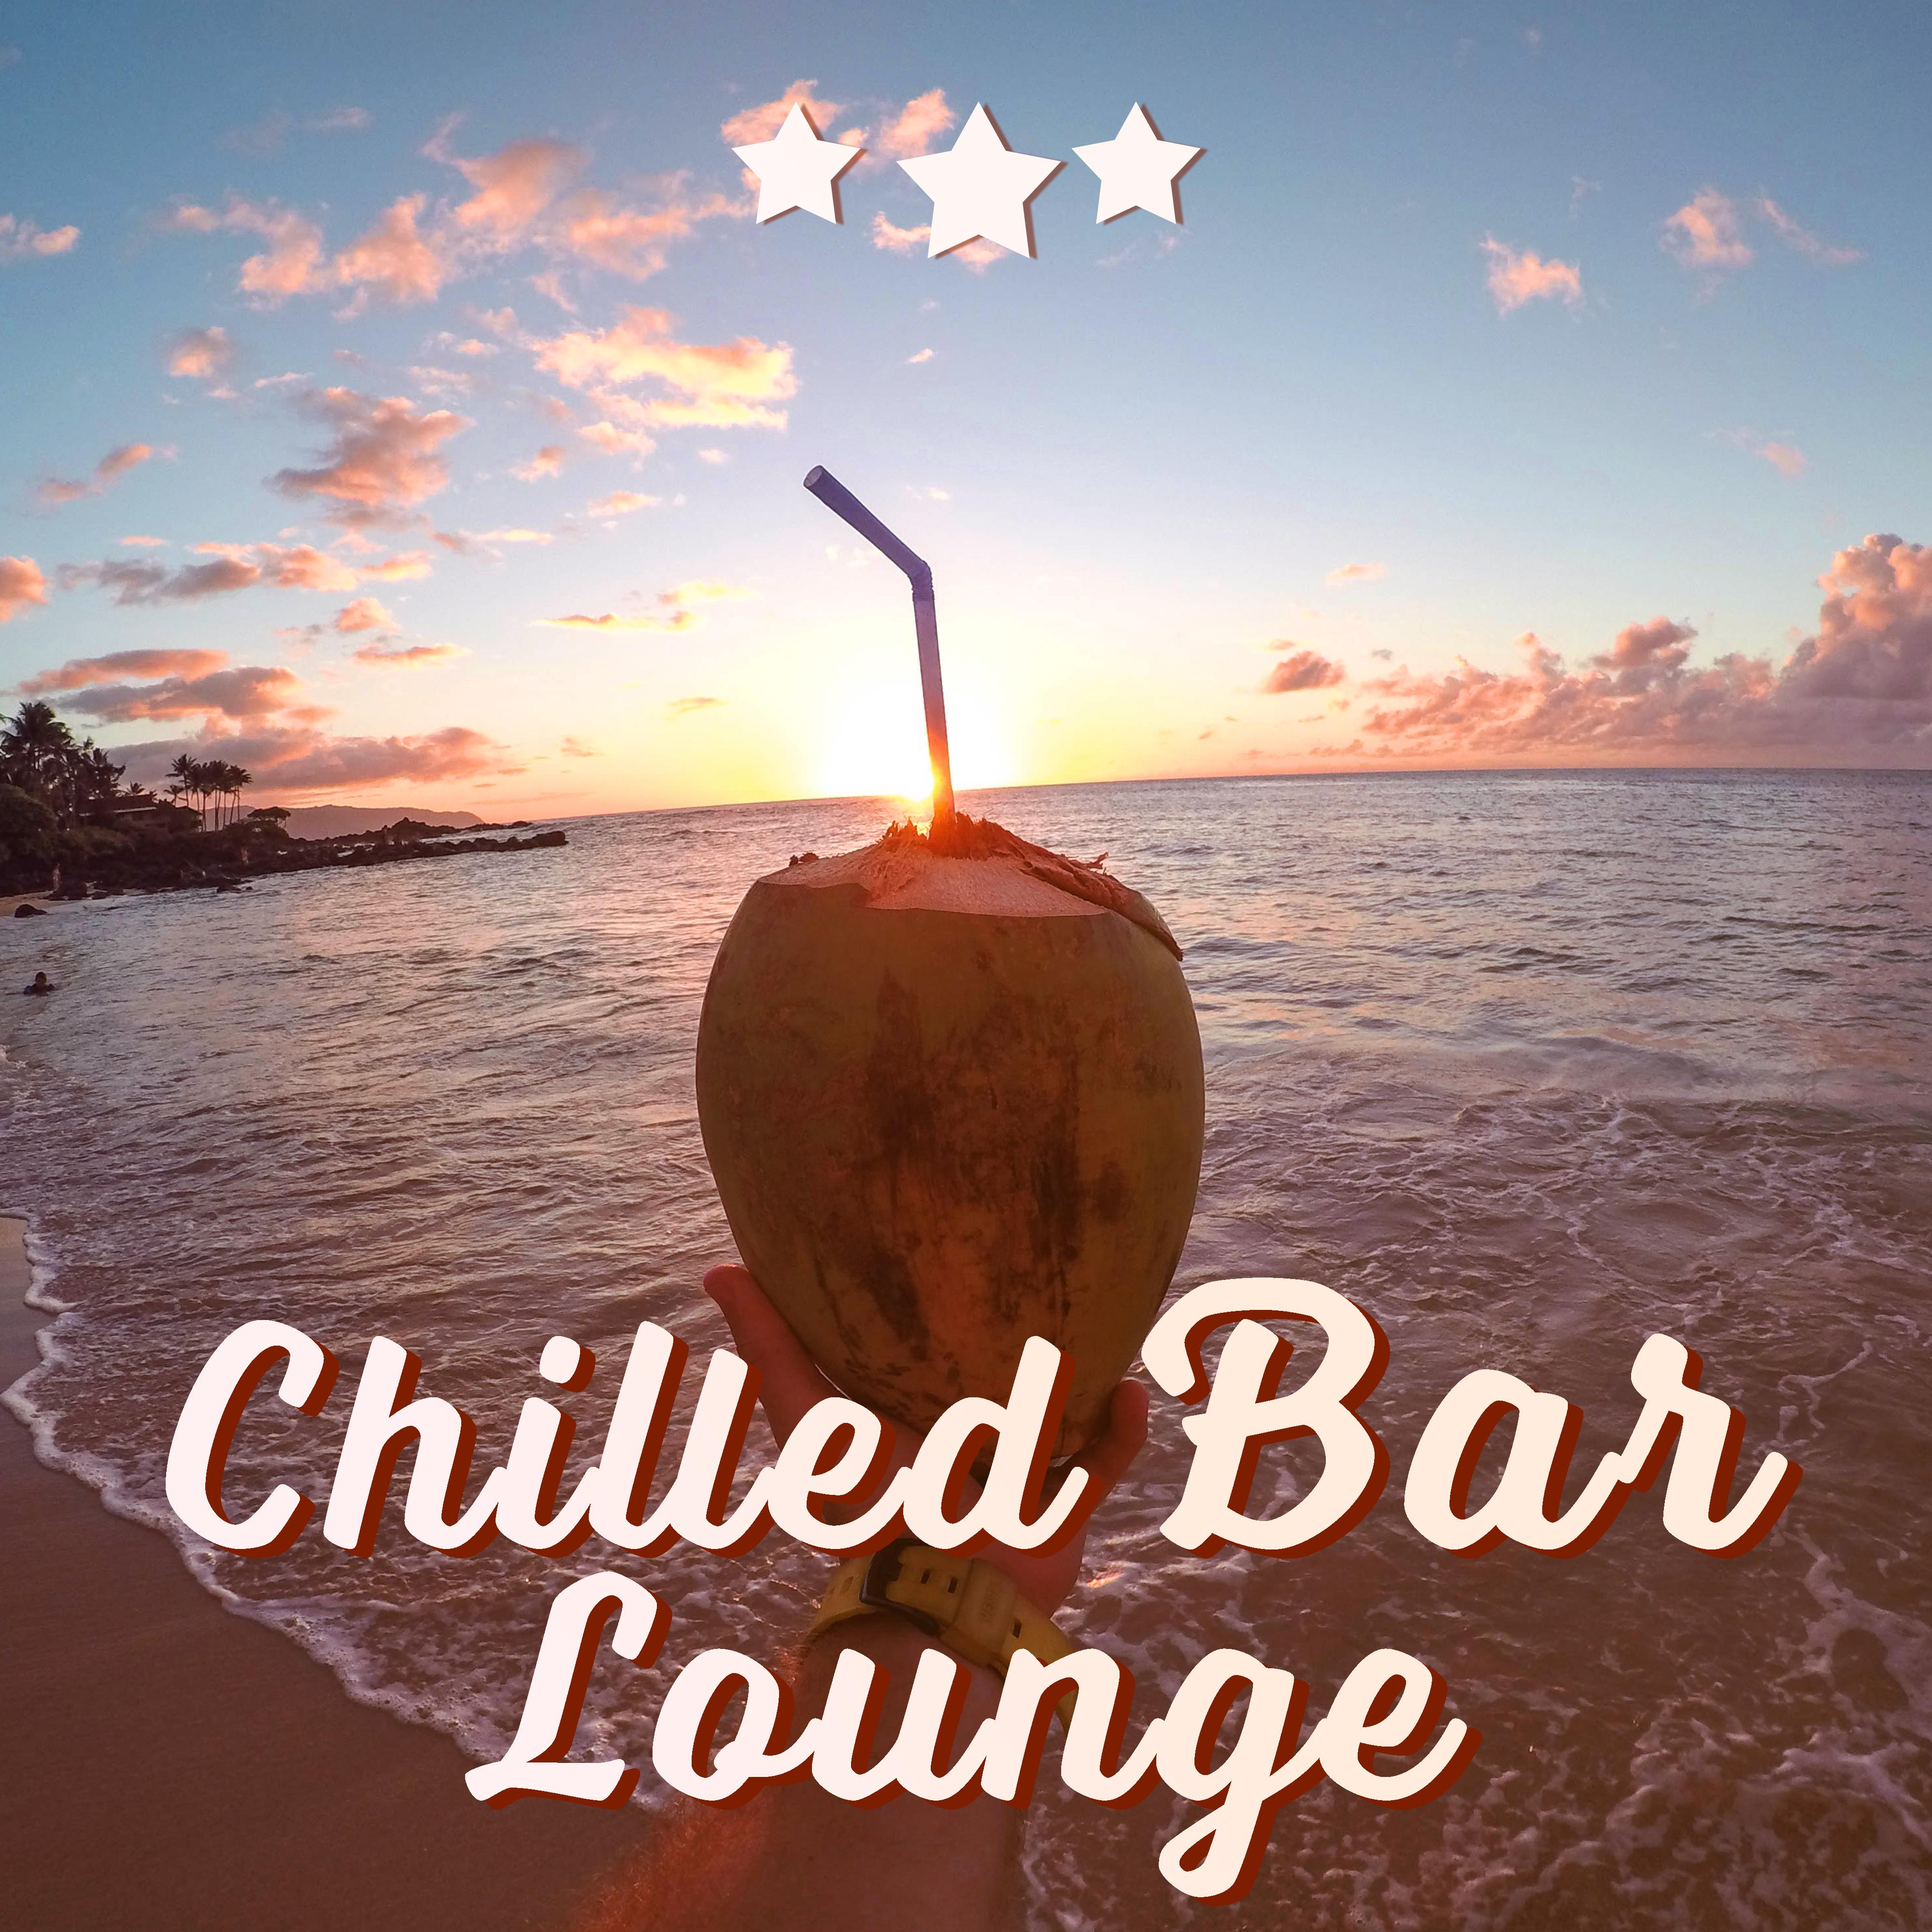 Chilled Bar Lounge – Beach Music, Summer Chill, Relax, Colorful Drinks, Deep Lounge, Cafe Chillout, Paradise Beach